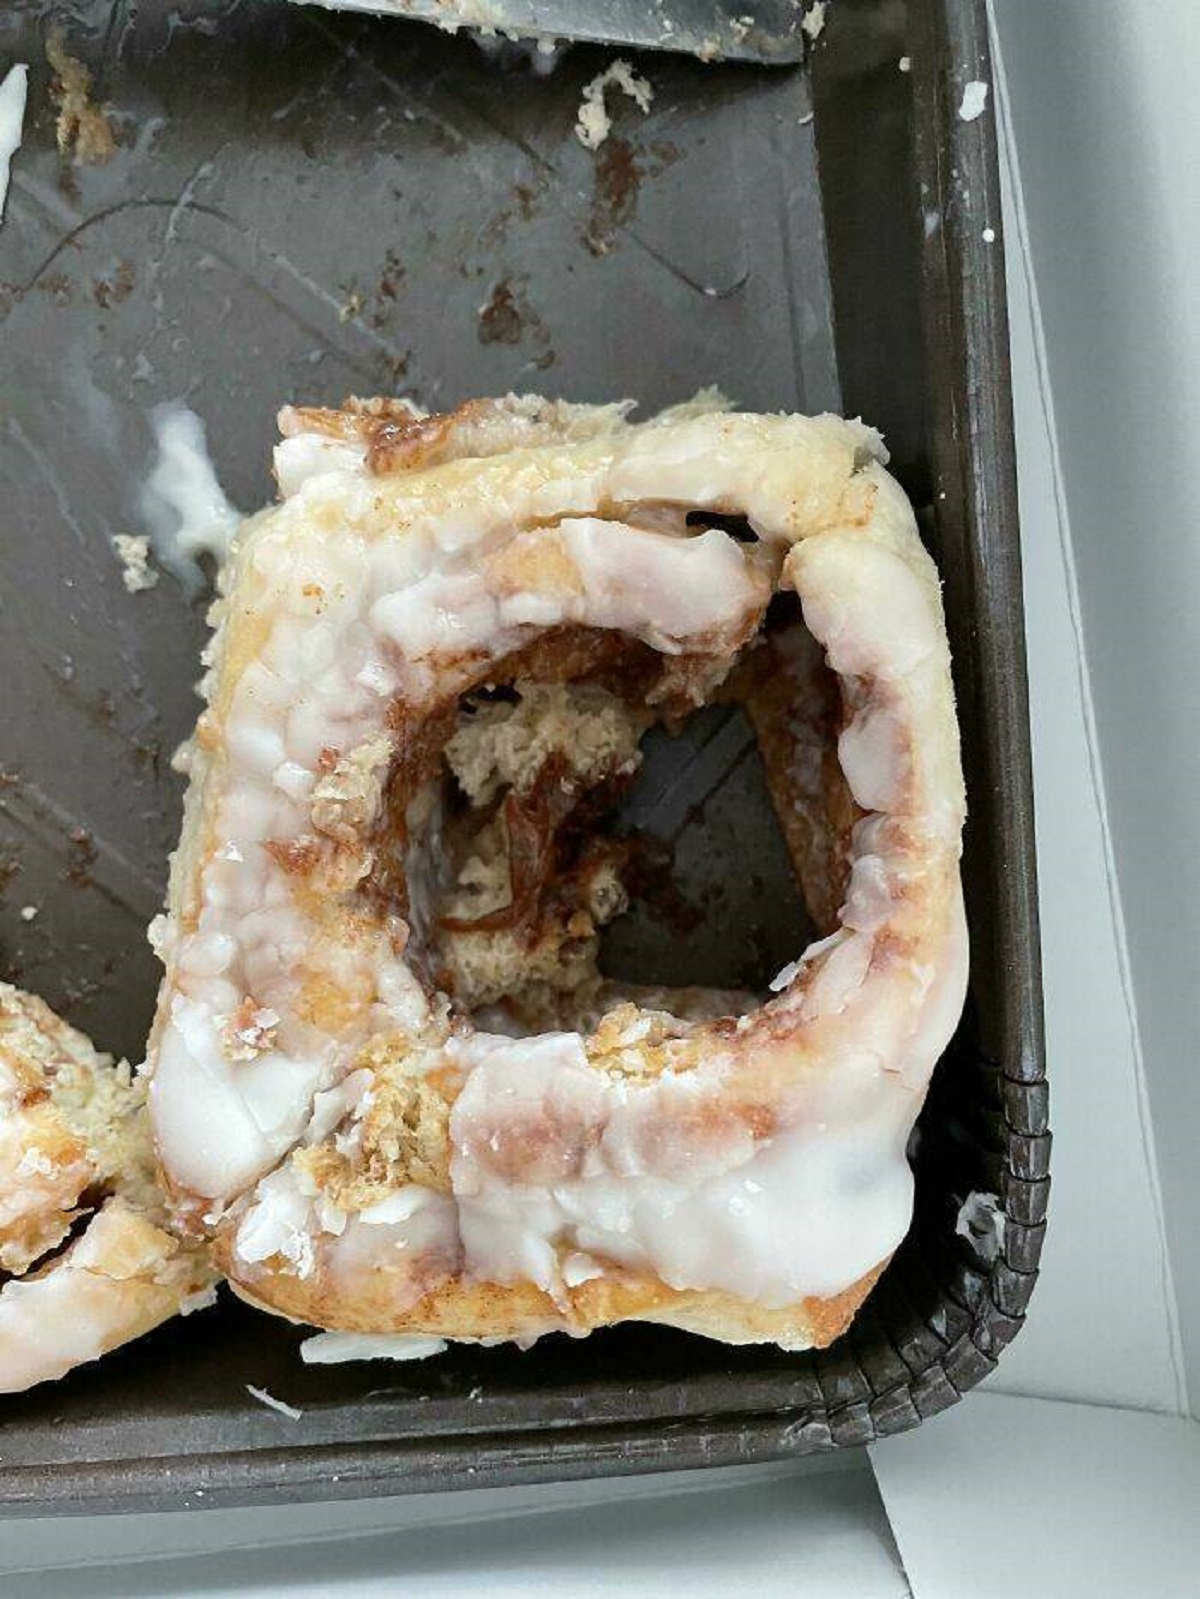 "Boss Brought In A Few Cinnamon Rolls To Share. One Of My Coworkers Did This:"